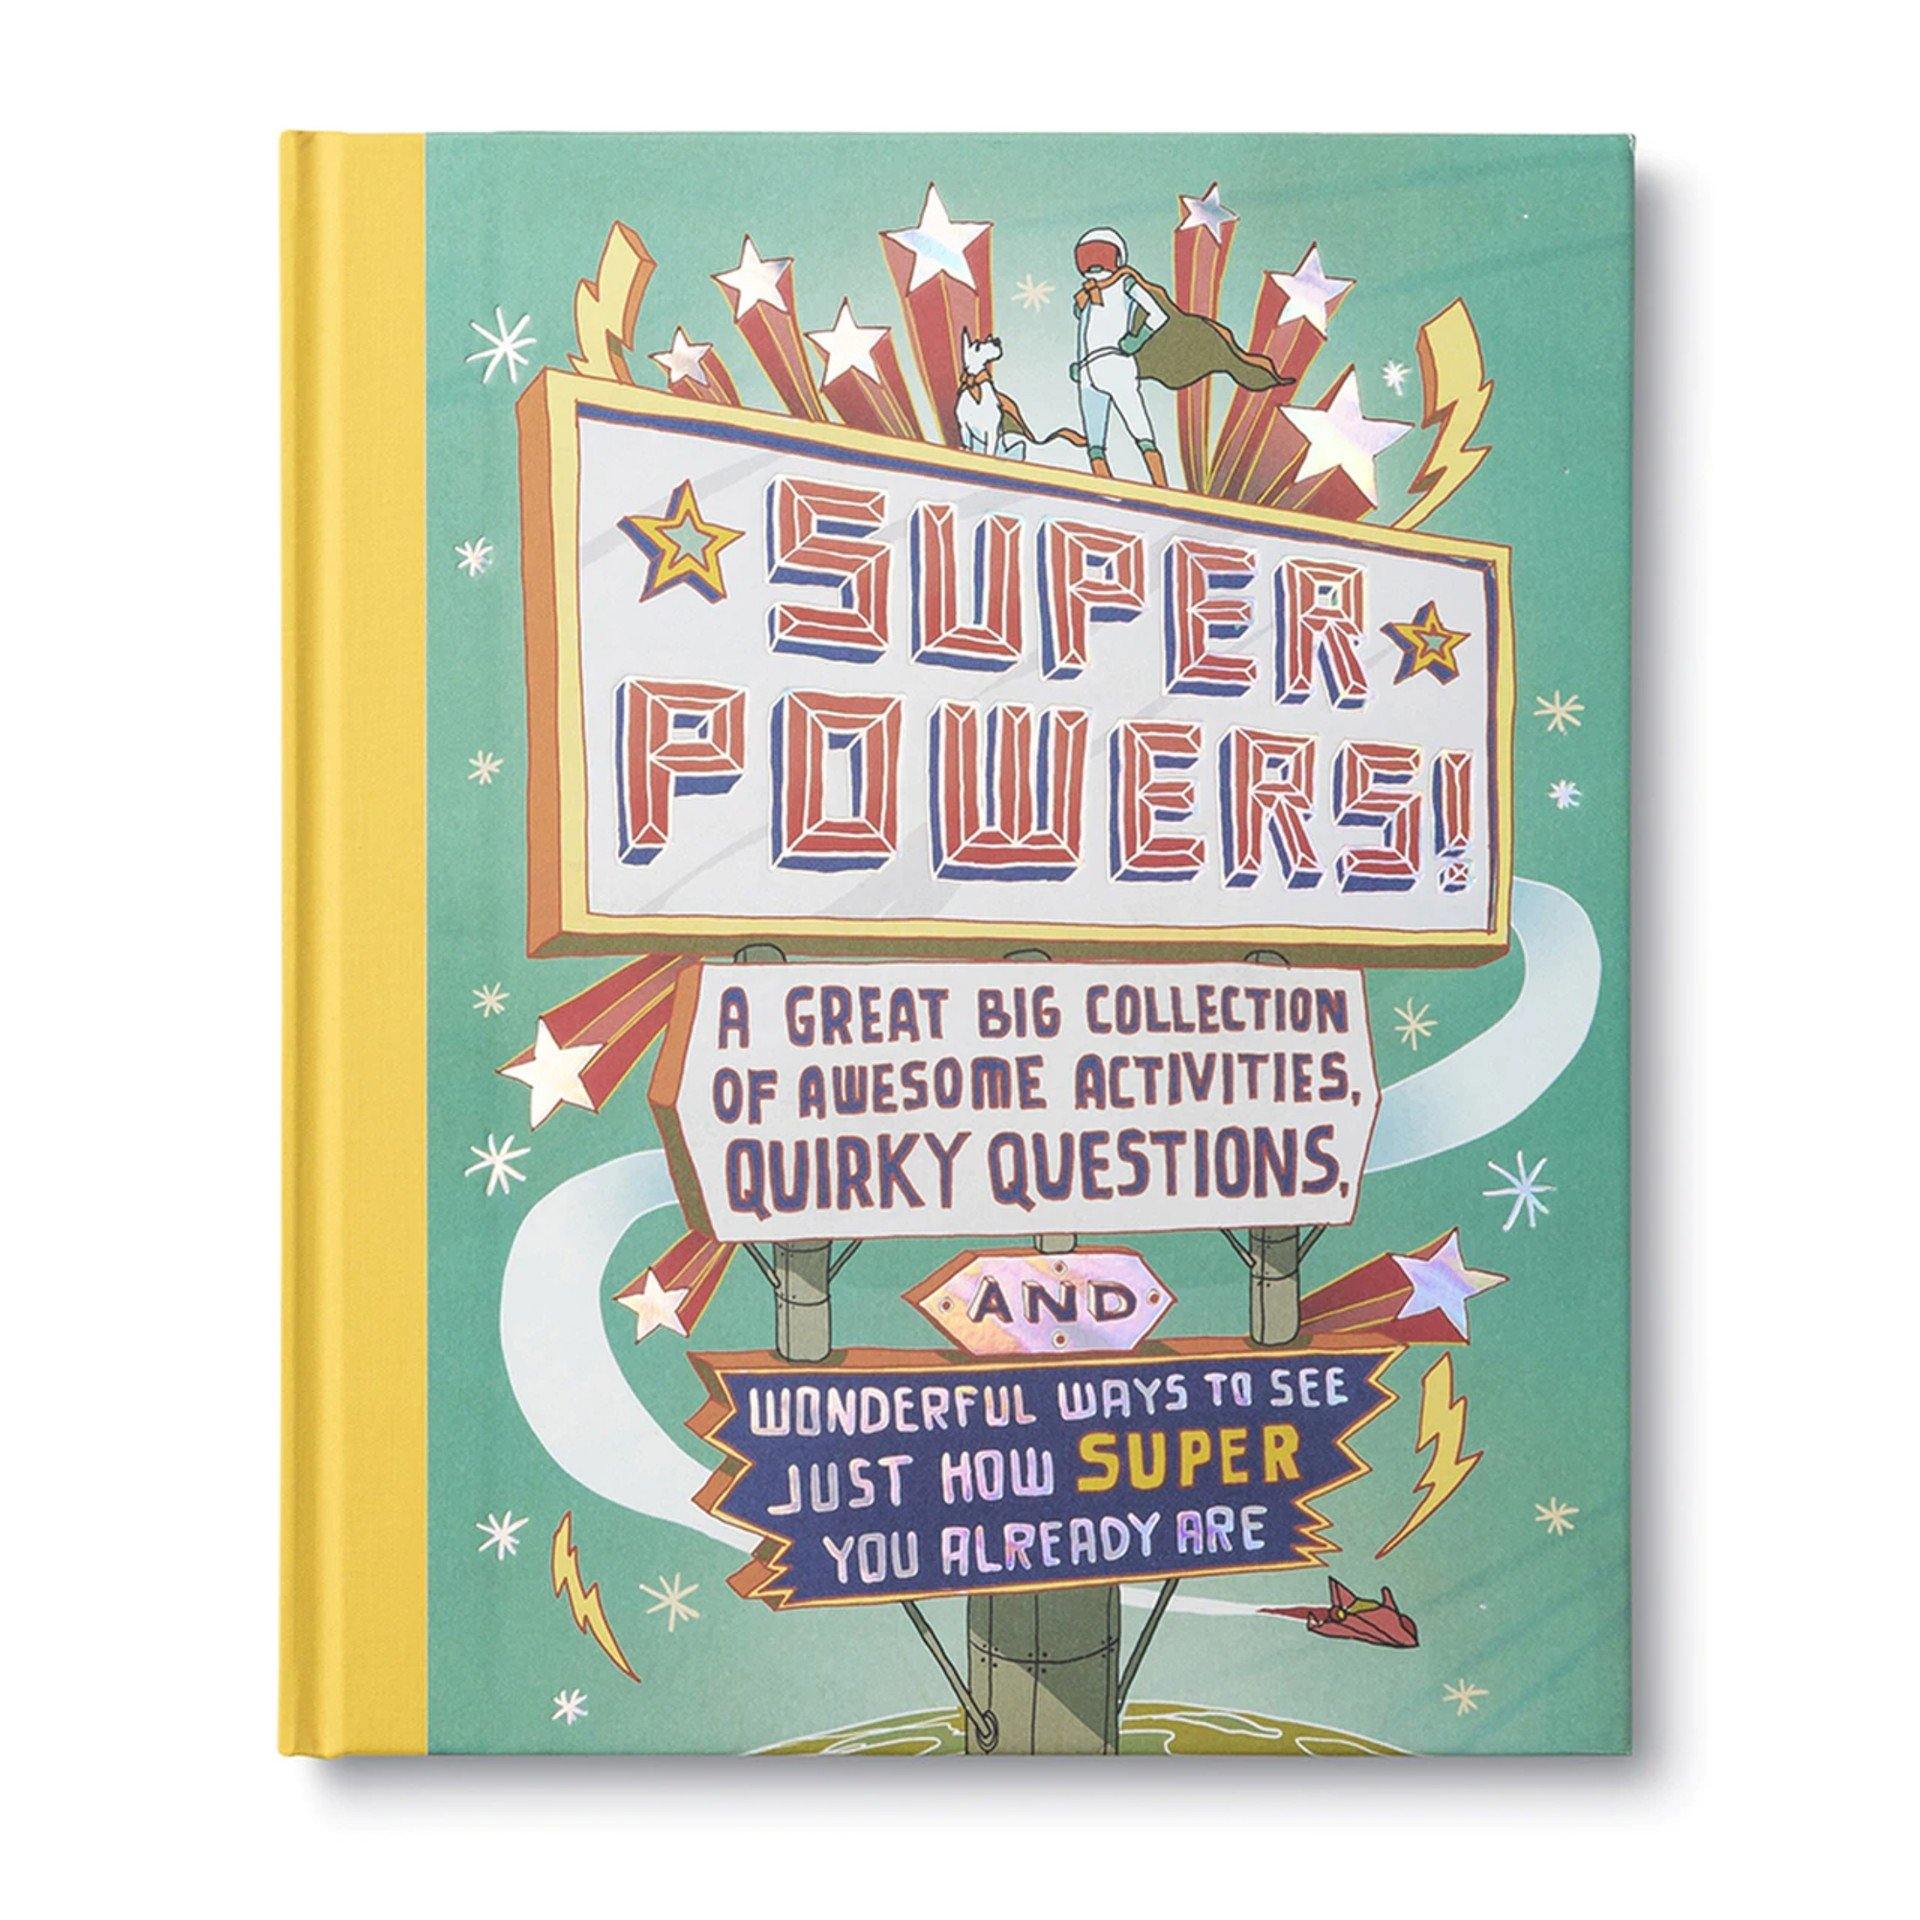 Super Powers! Activity Book - DIGS